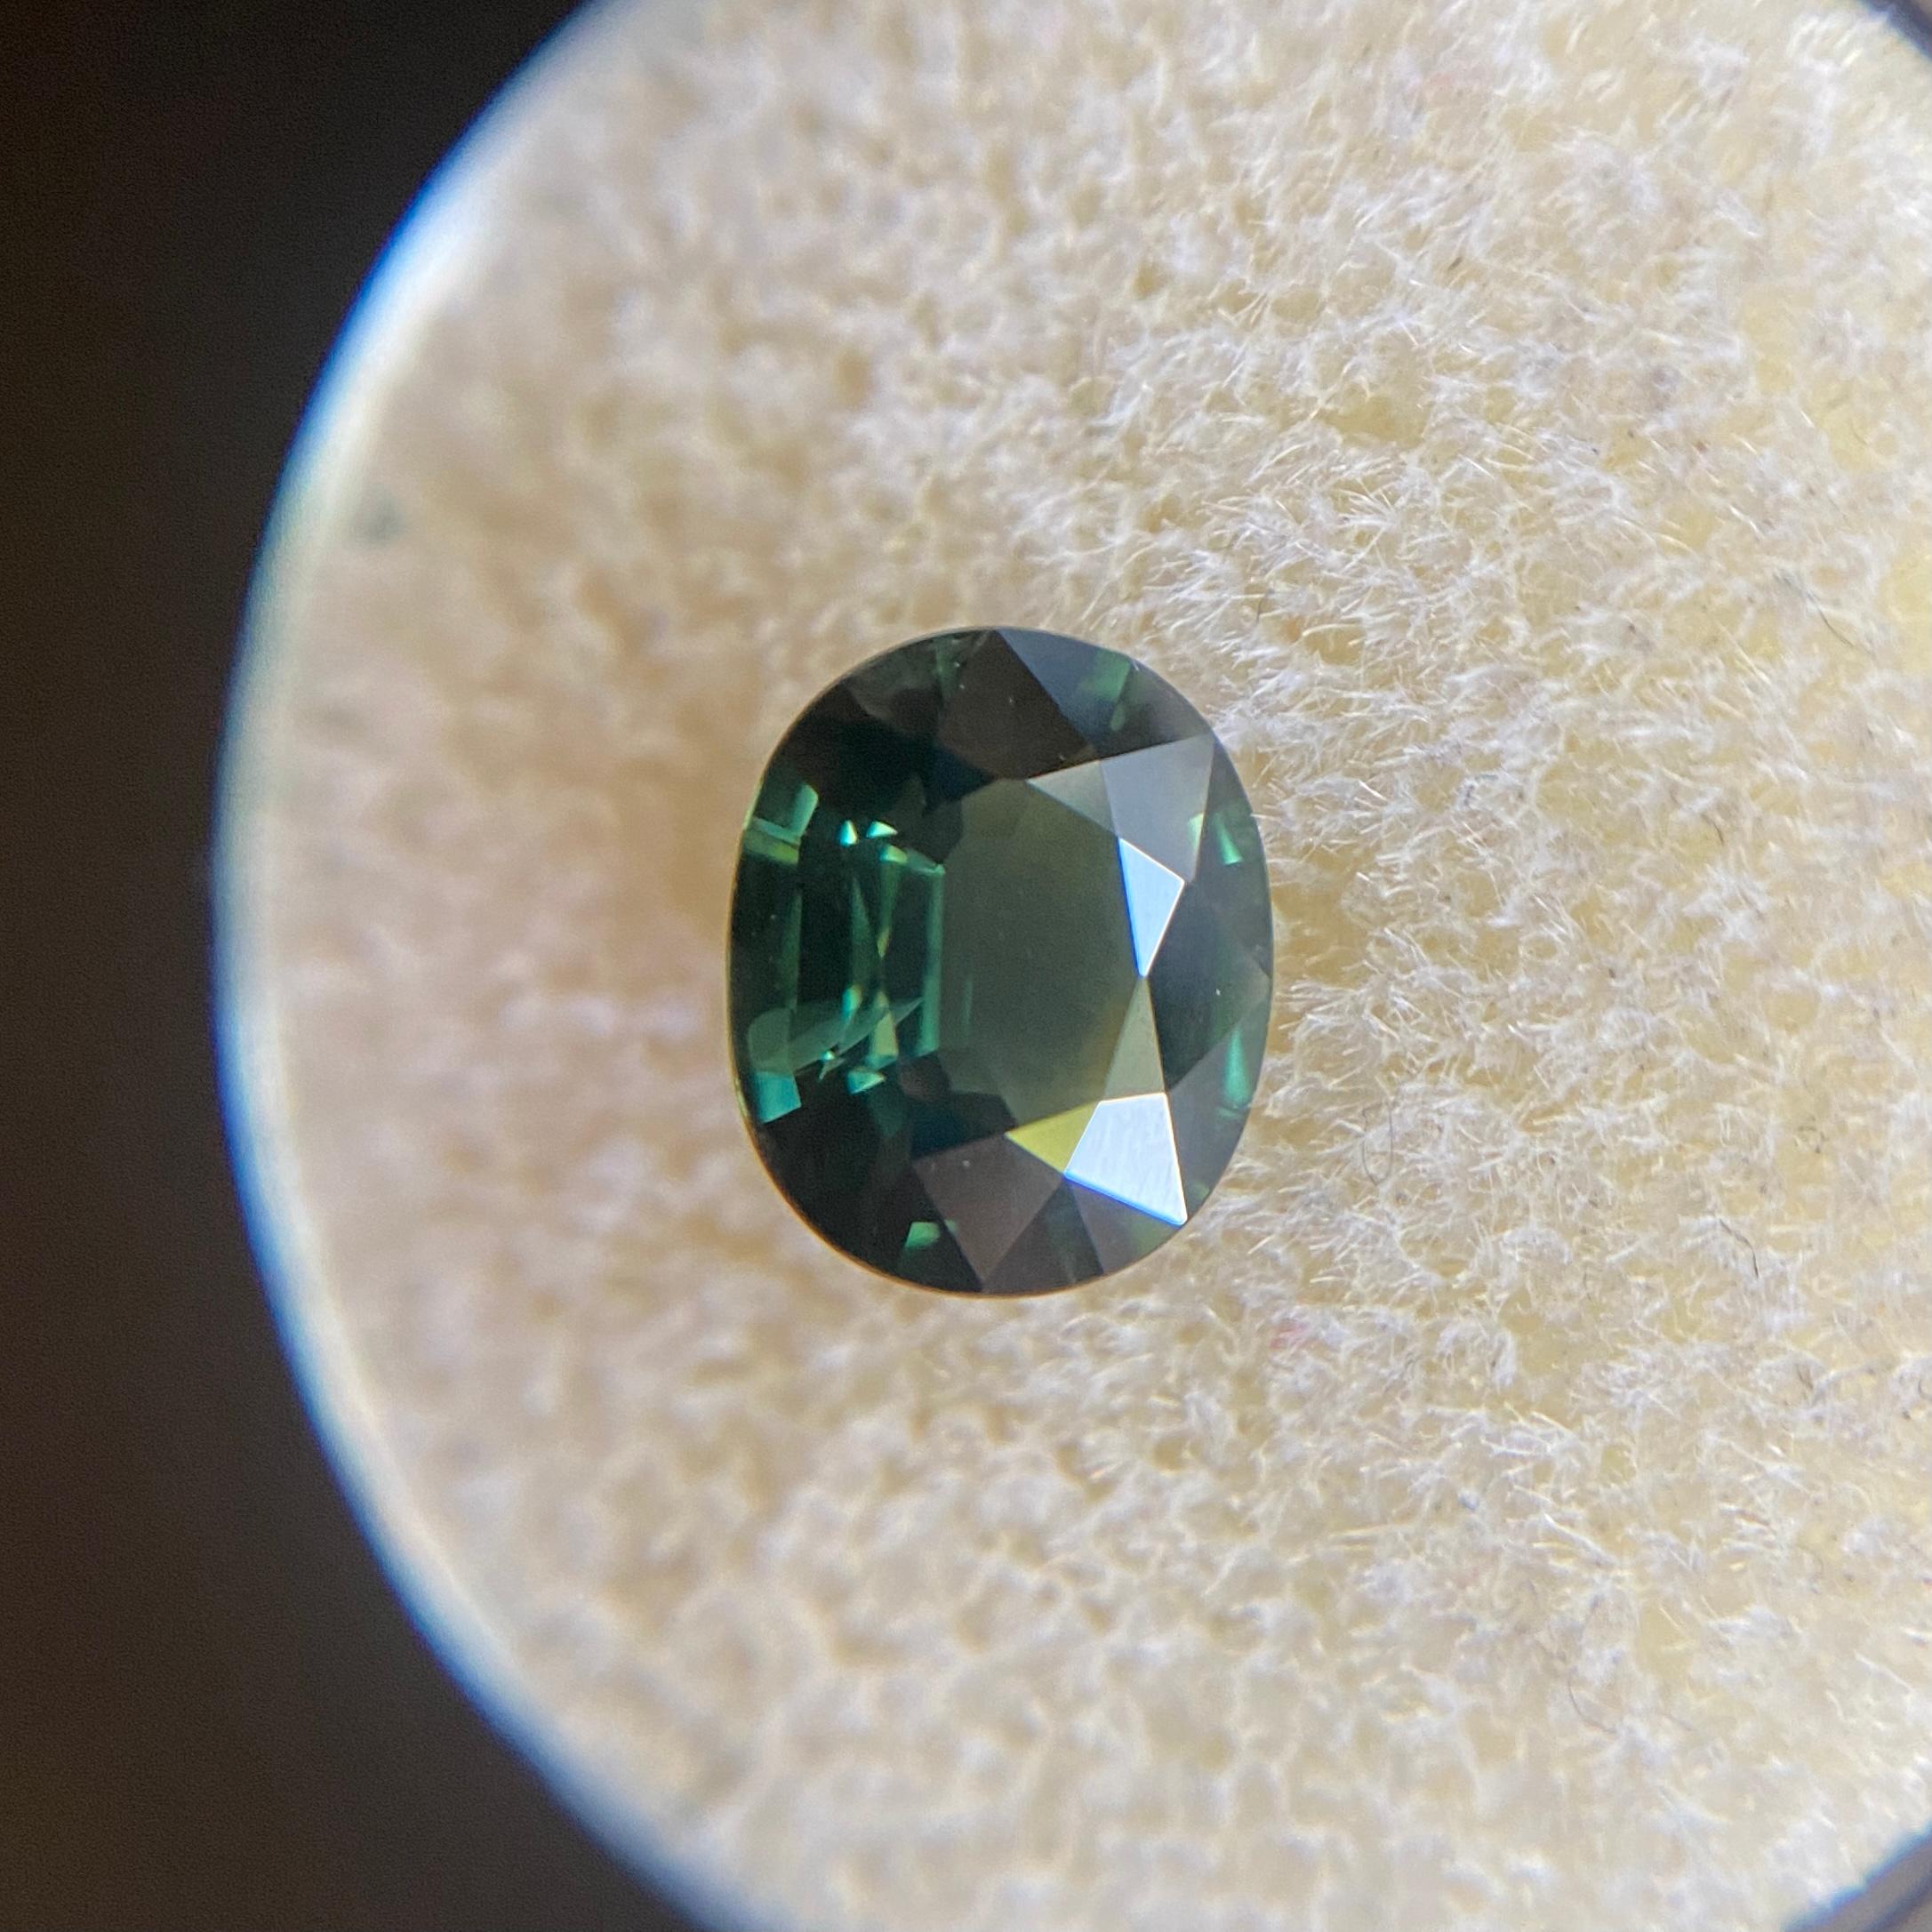 GRA Certified Green Sapphire Gemstone.

1.67 Carat sapphire with a beautiful green colour. Fully certified by GRA confirming stone as natural with excellent clarity, a very clean stone.

The sapphire also has an excellent oval cut and ideal polish